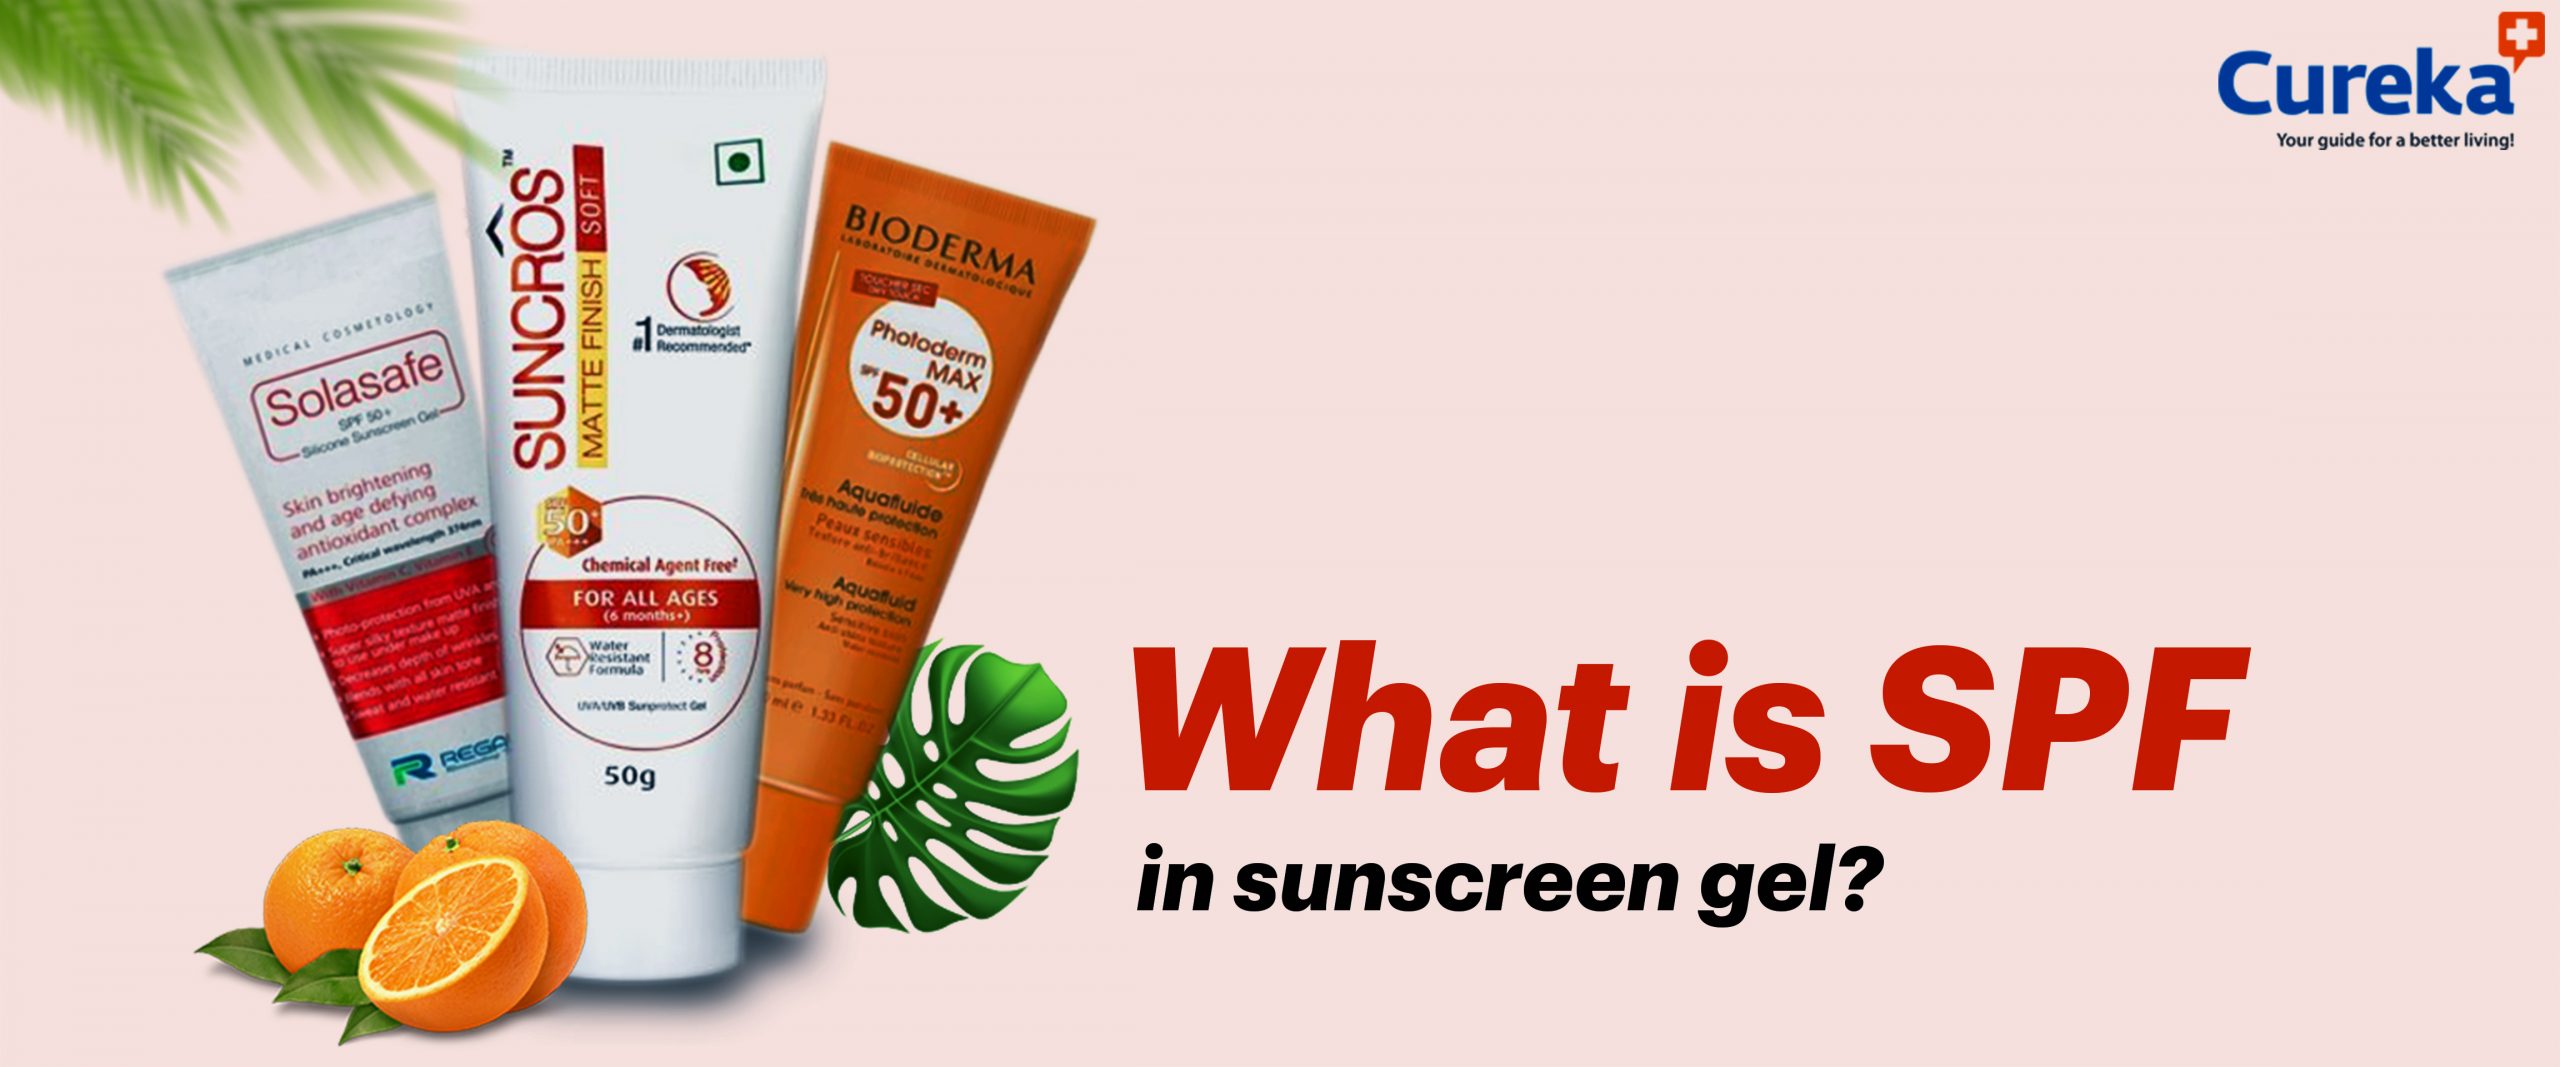 What is spf in sunscreen gel